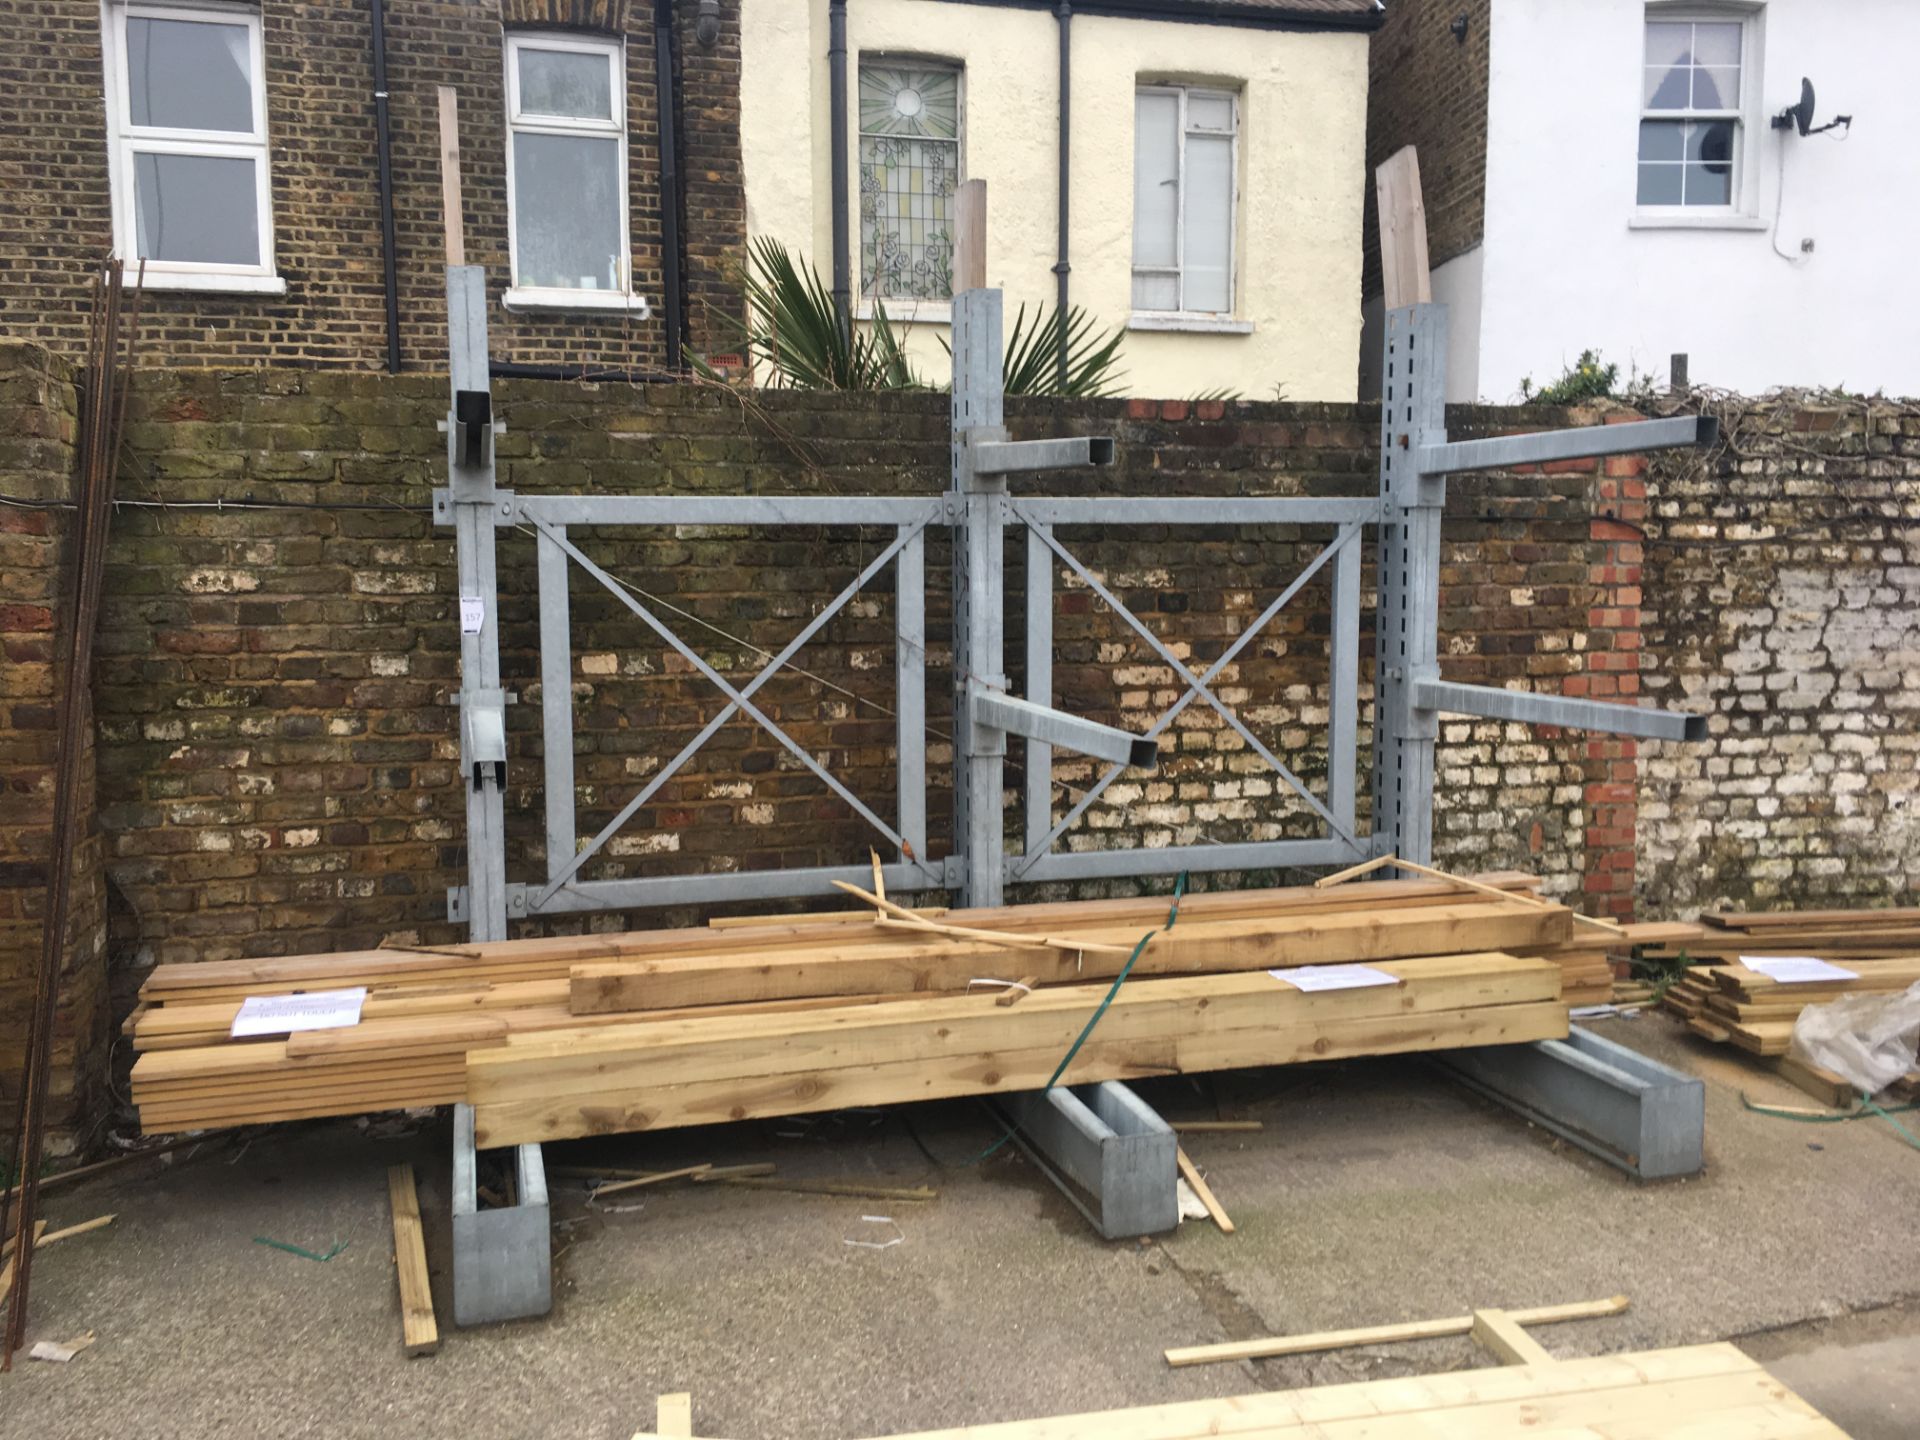 Yard Racks Comprising: 3 Uprights, 6 Arms & 2 Cross Members at Rear (located at Tooting, viewing